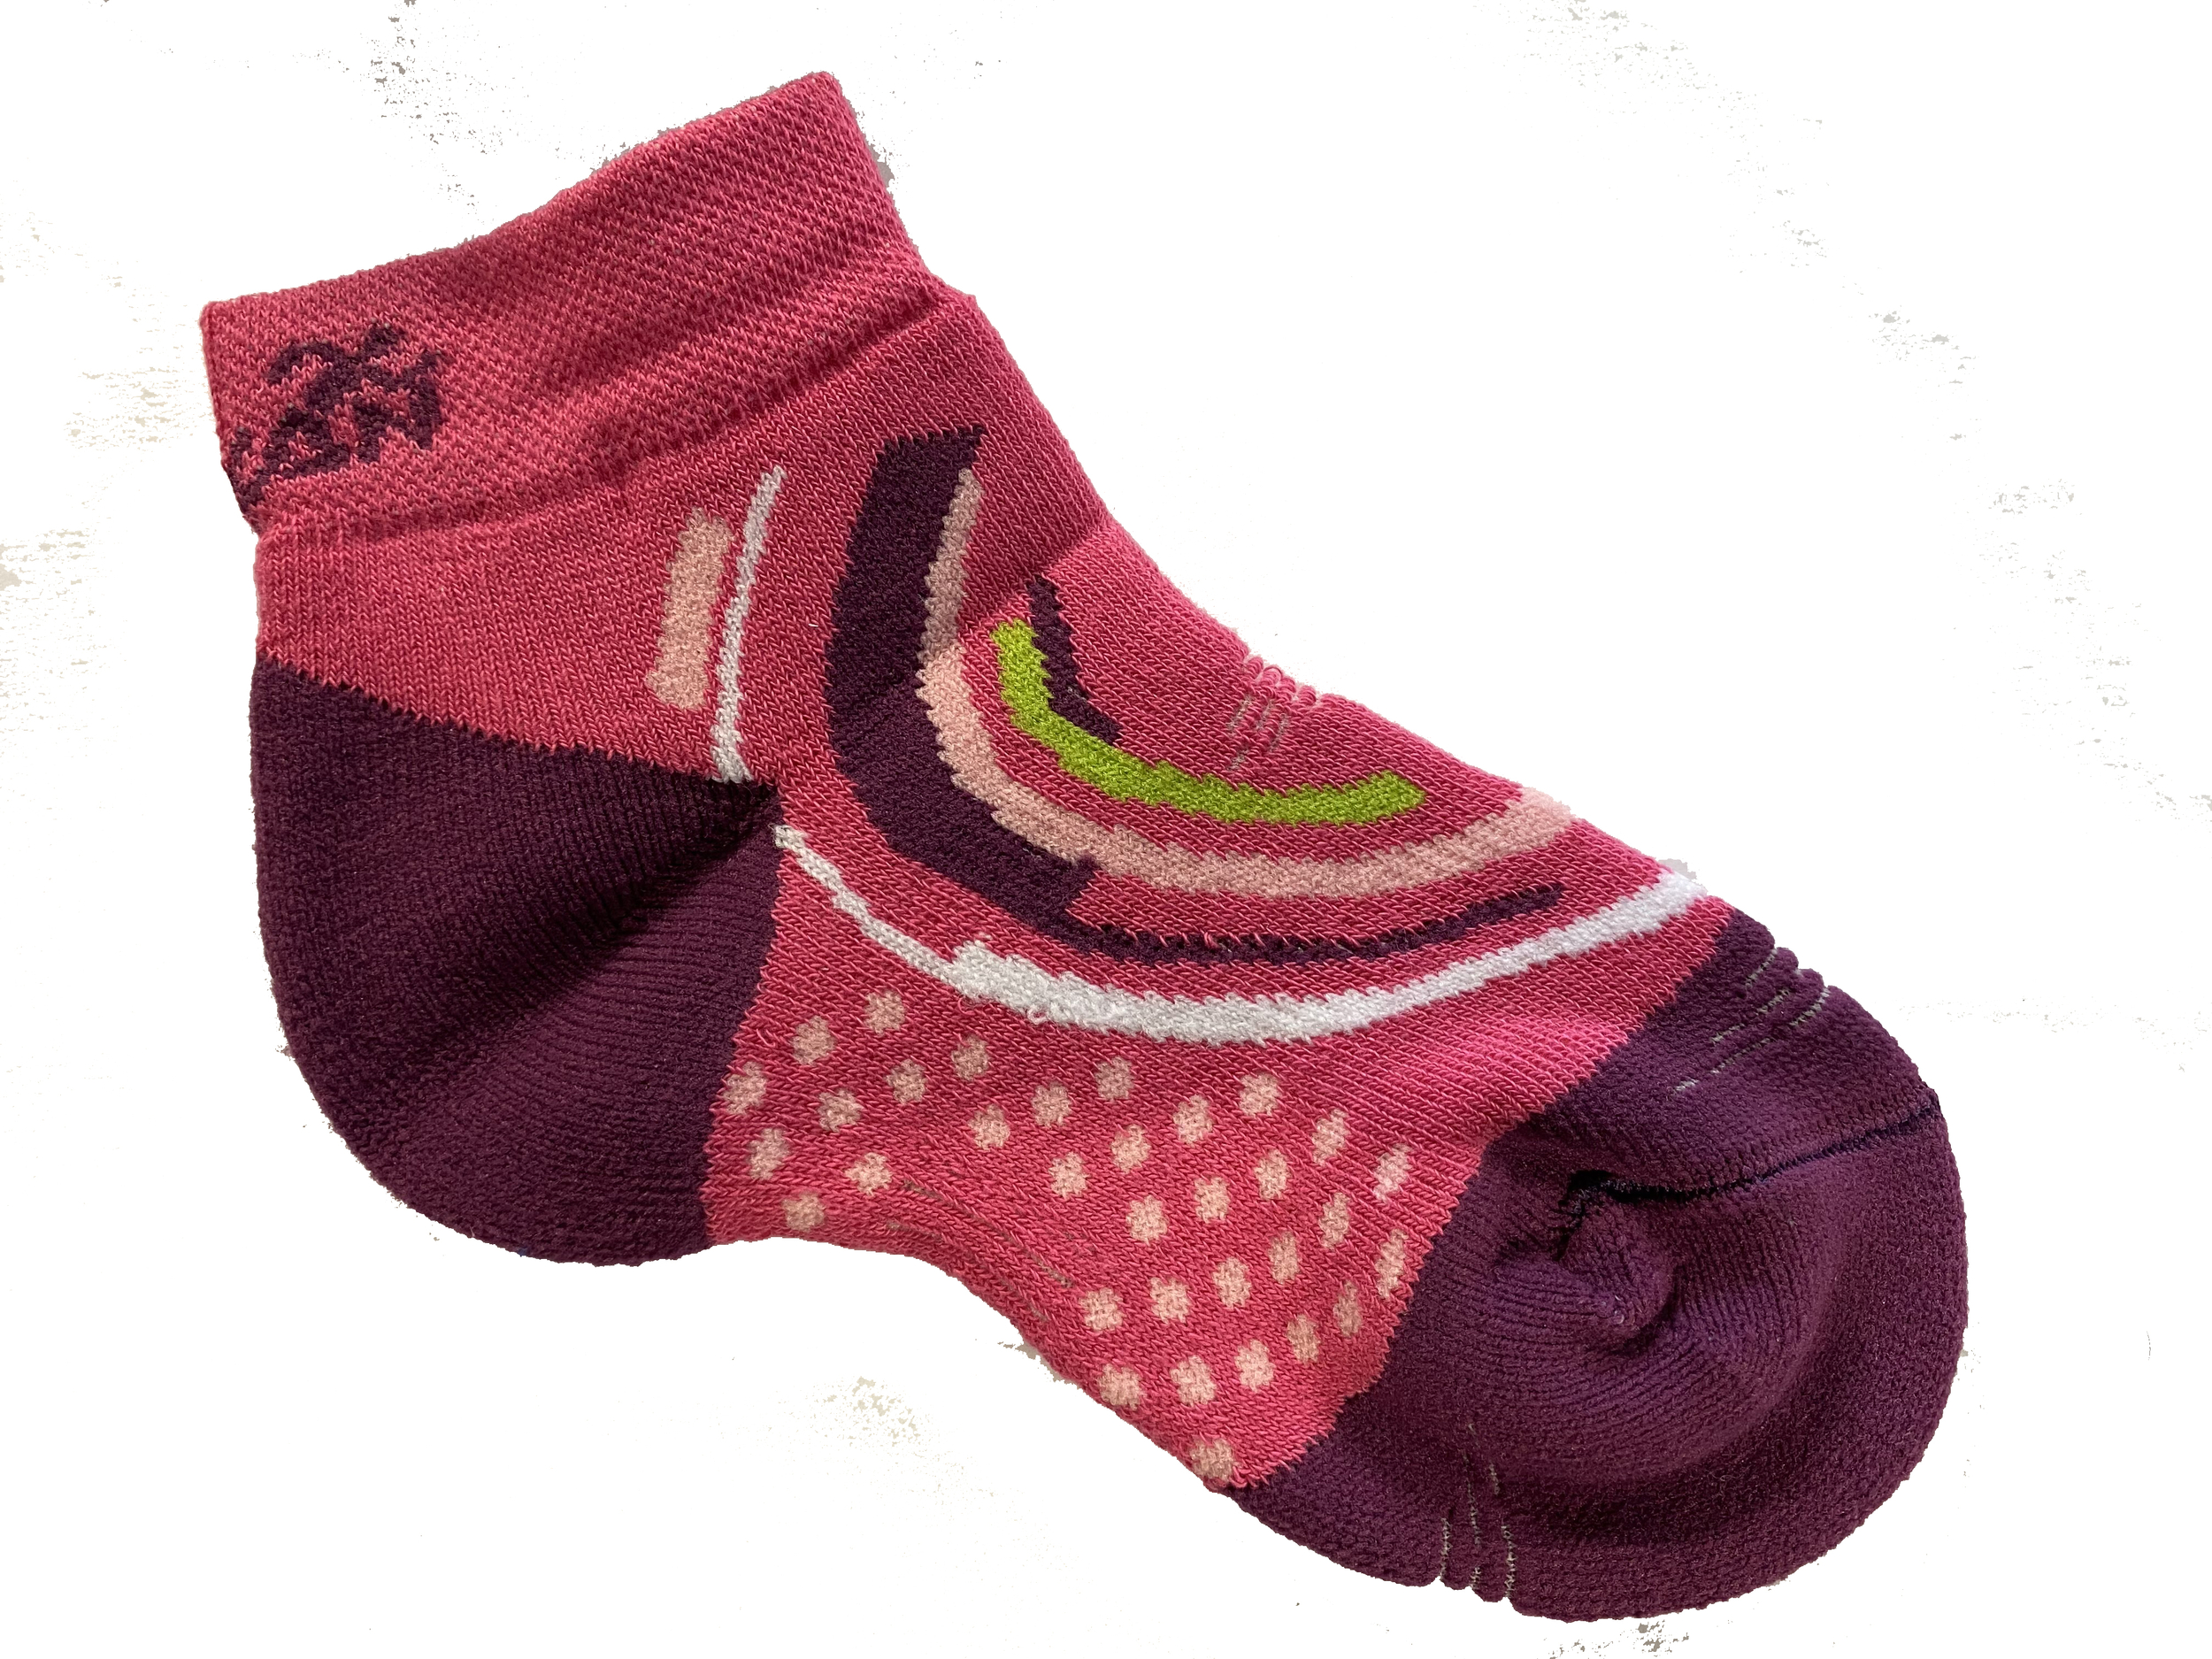 Chaussettes fille Rywan Glossy - Textile Enfant - Sports Hiver